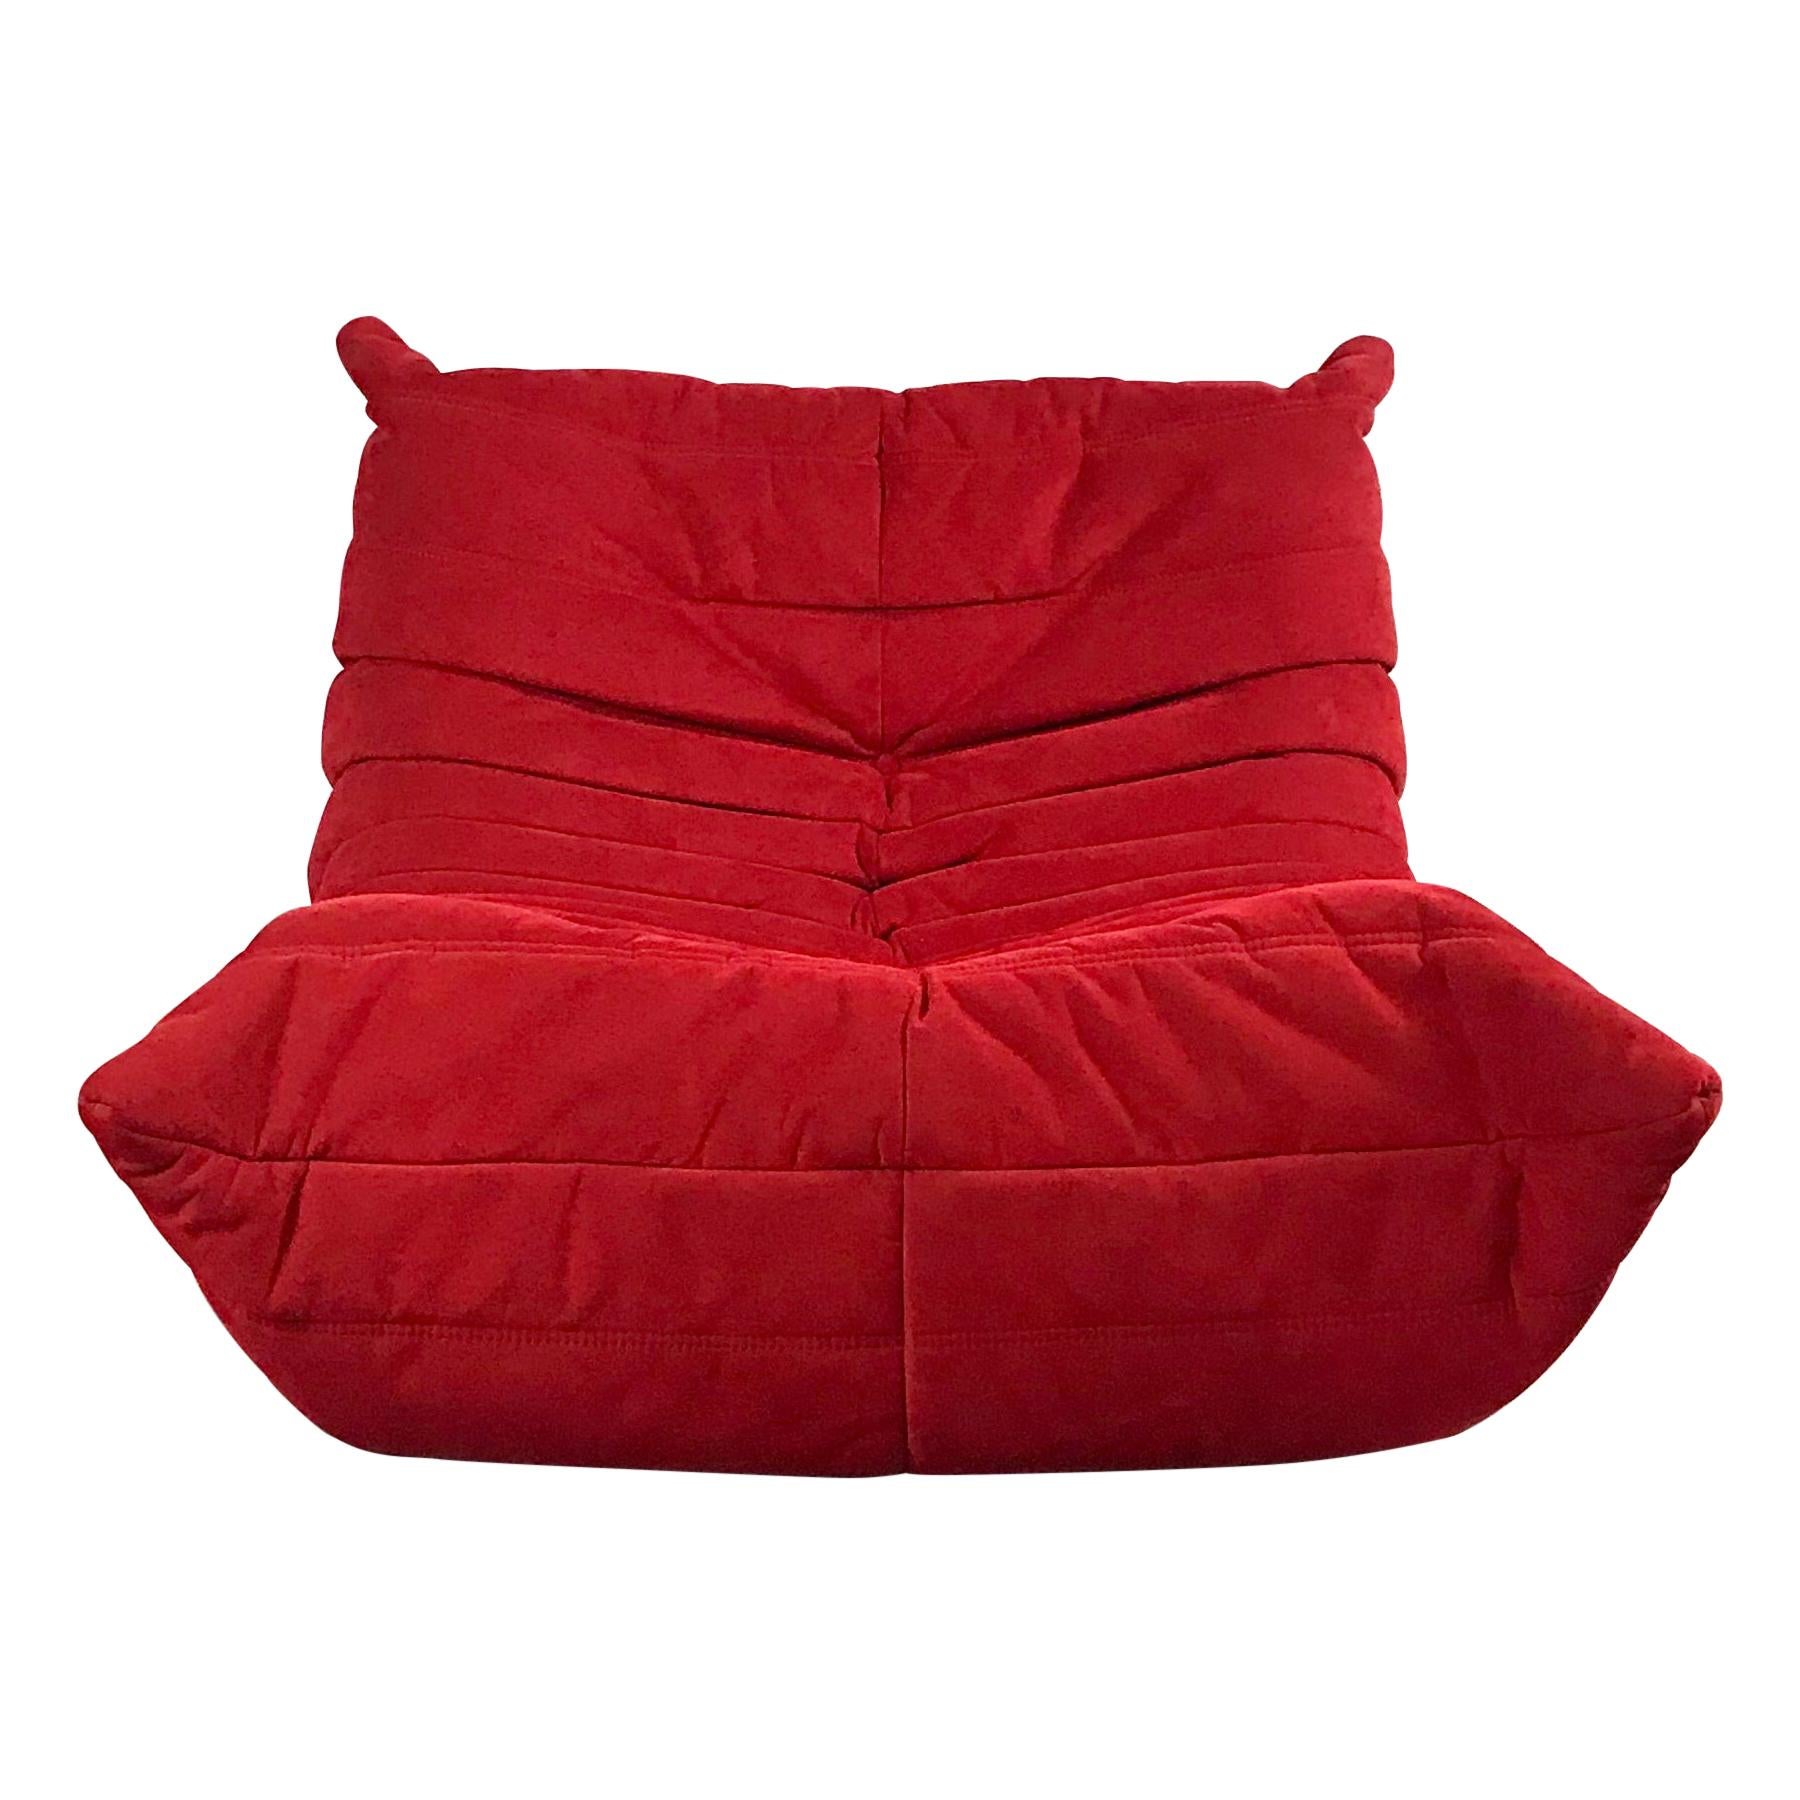 French Togo Lounge Chair in Alcantar Goya Red by Michel Ducaroy for Ligne Roset For Sale